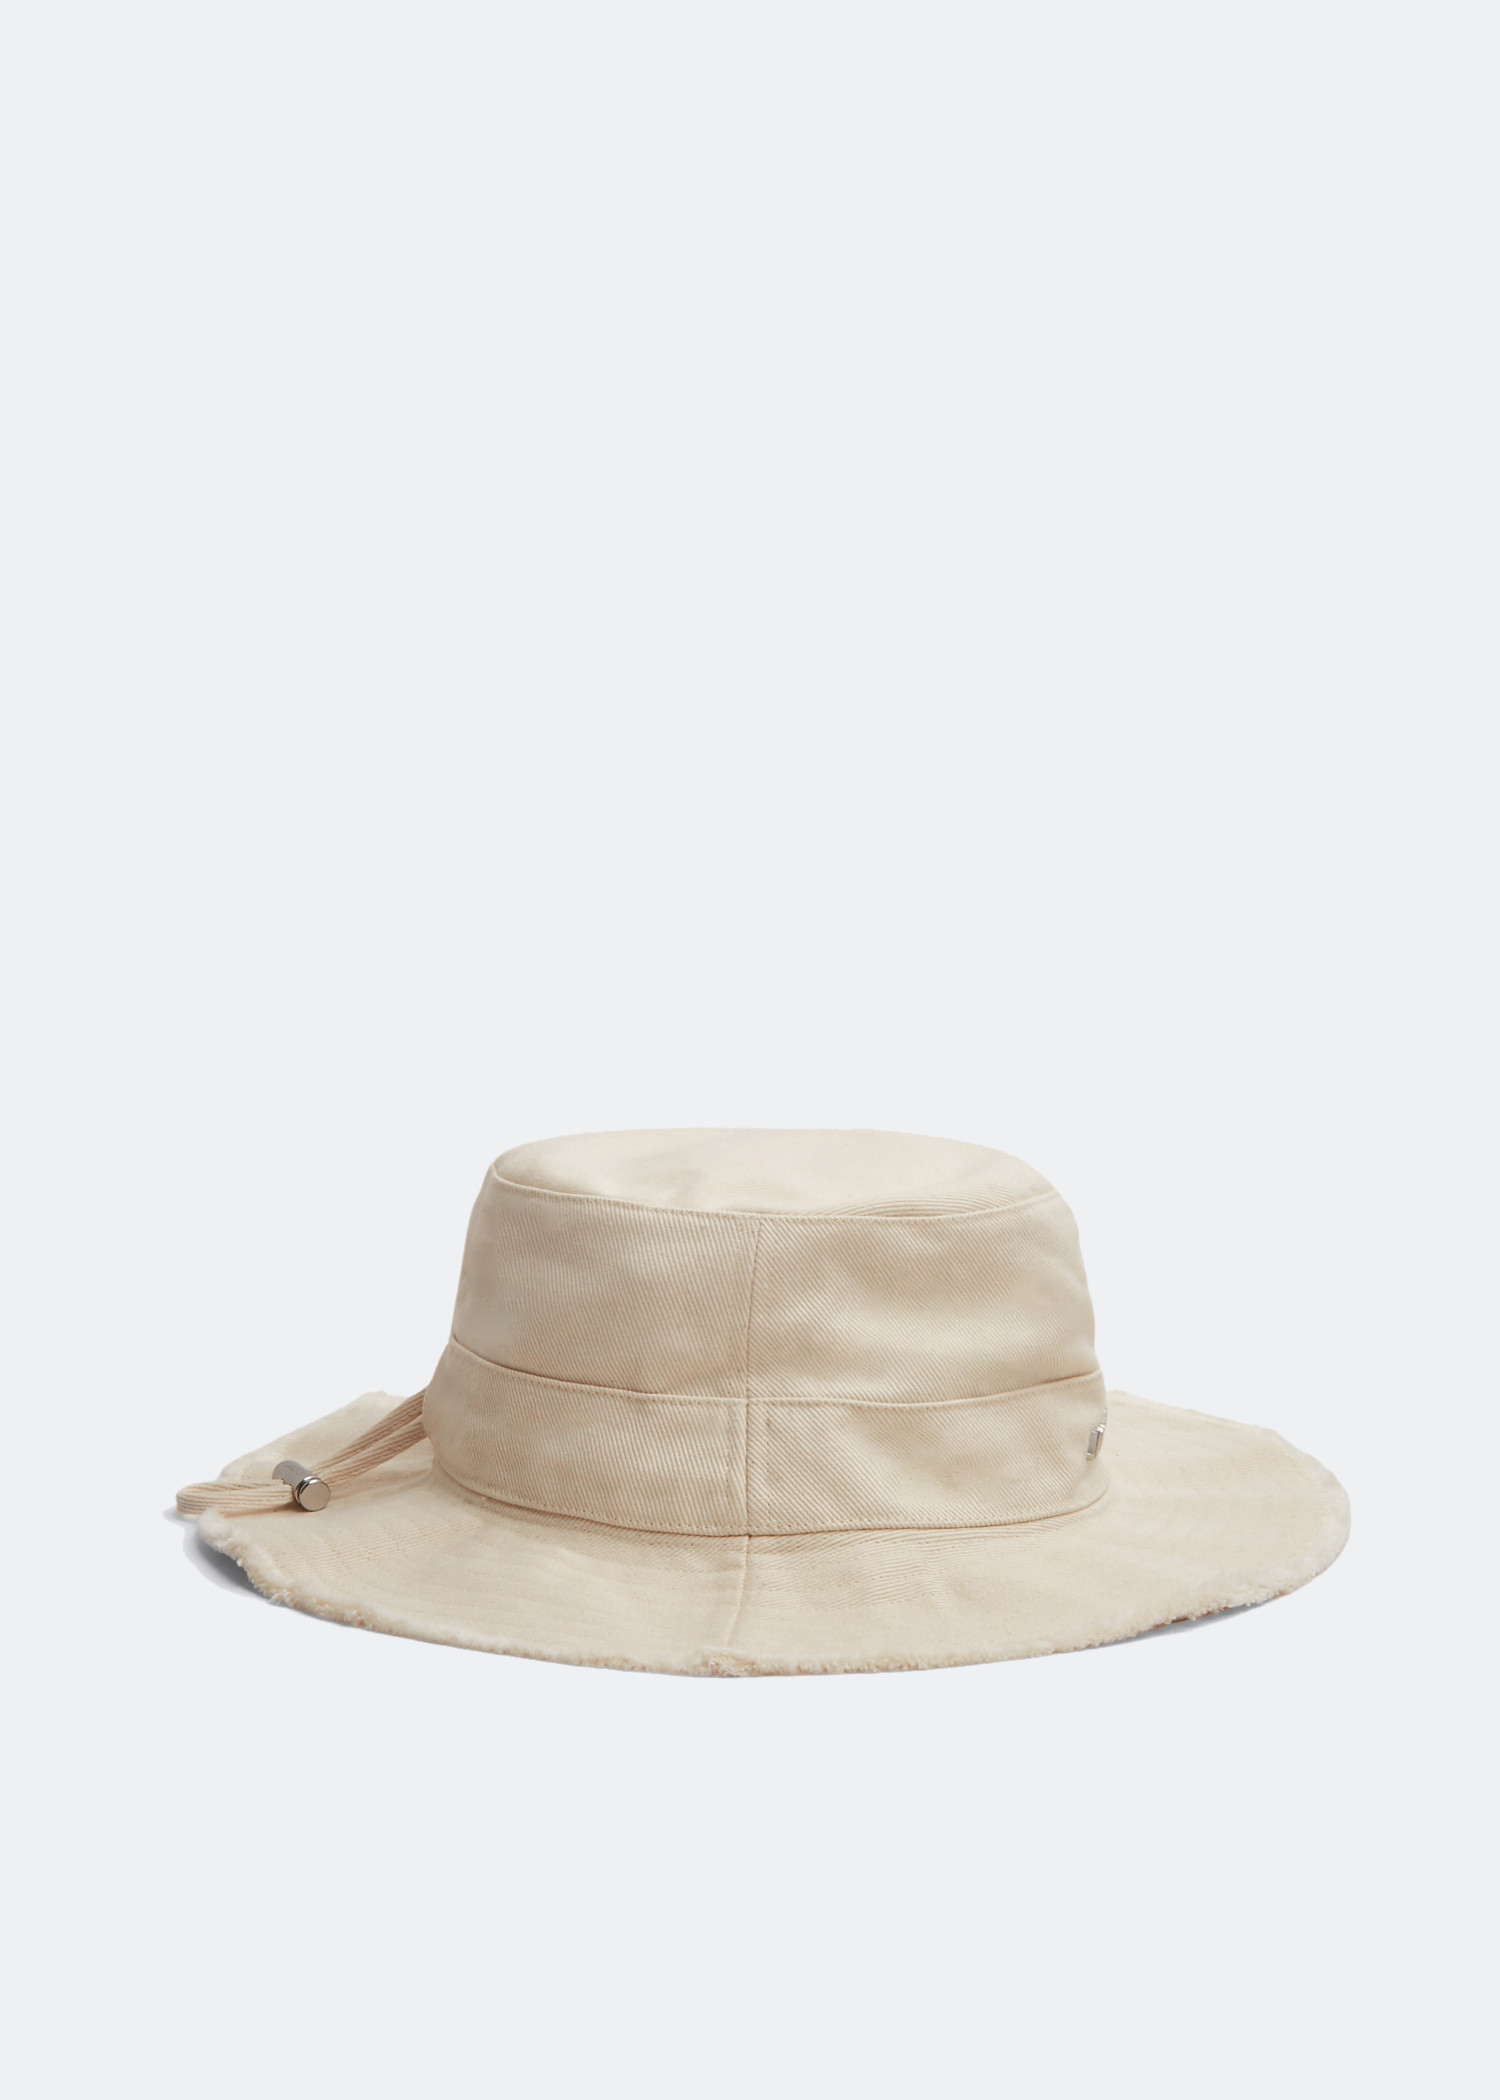 Sun Caps Le Bob Artichaut With Inner Label: Stylish Mens And Womens Beach  Hat For Outdoor Travel From Tybgt, $17.96